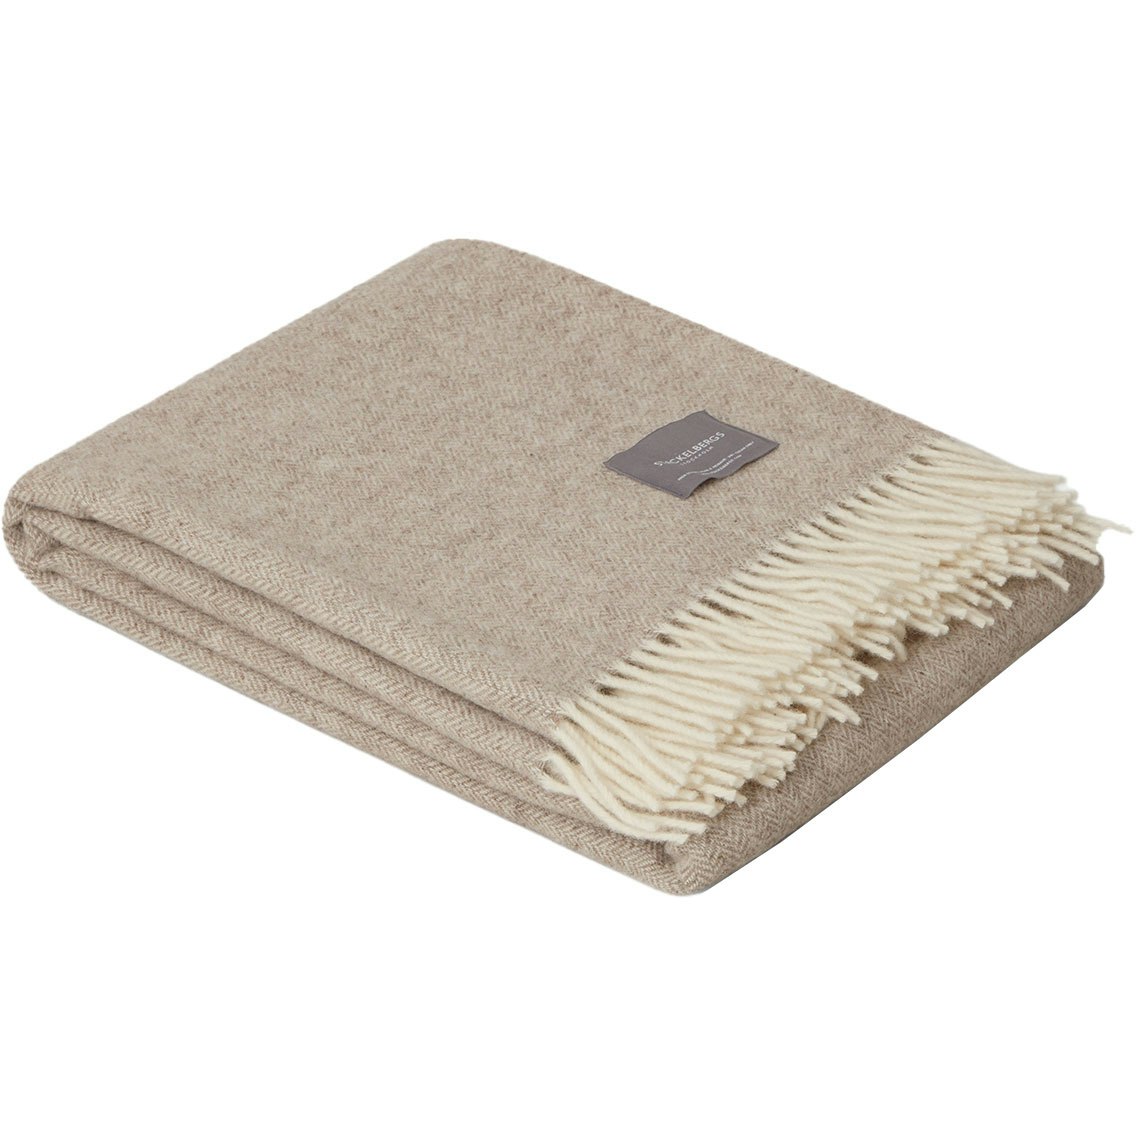 Wool Fishbone Tæppe 130x170 cm, Lyst Taupe/Offwhite